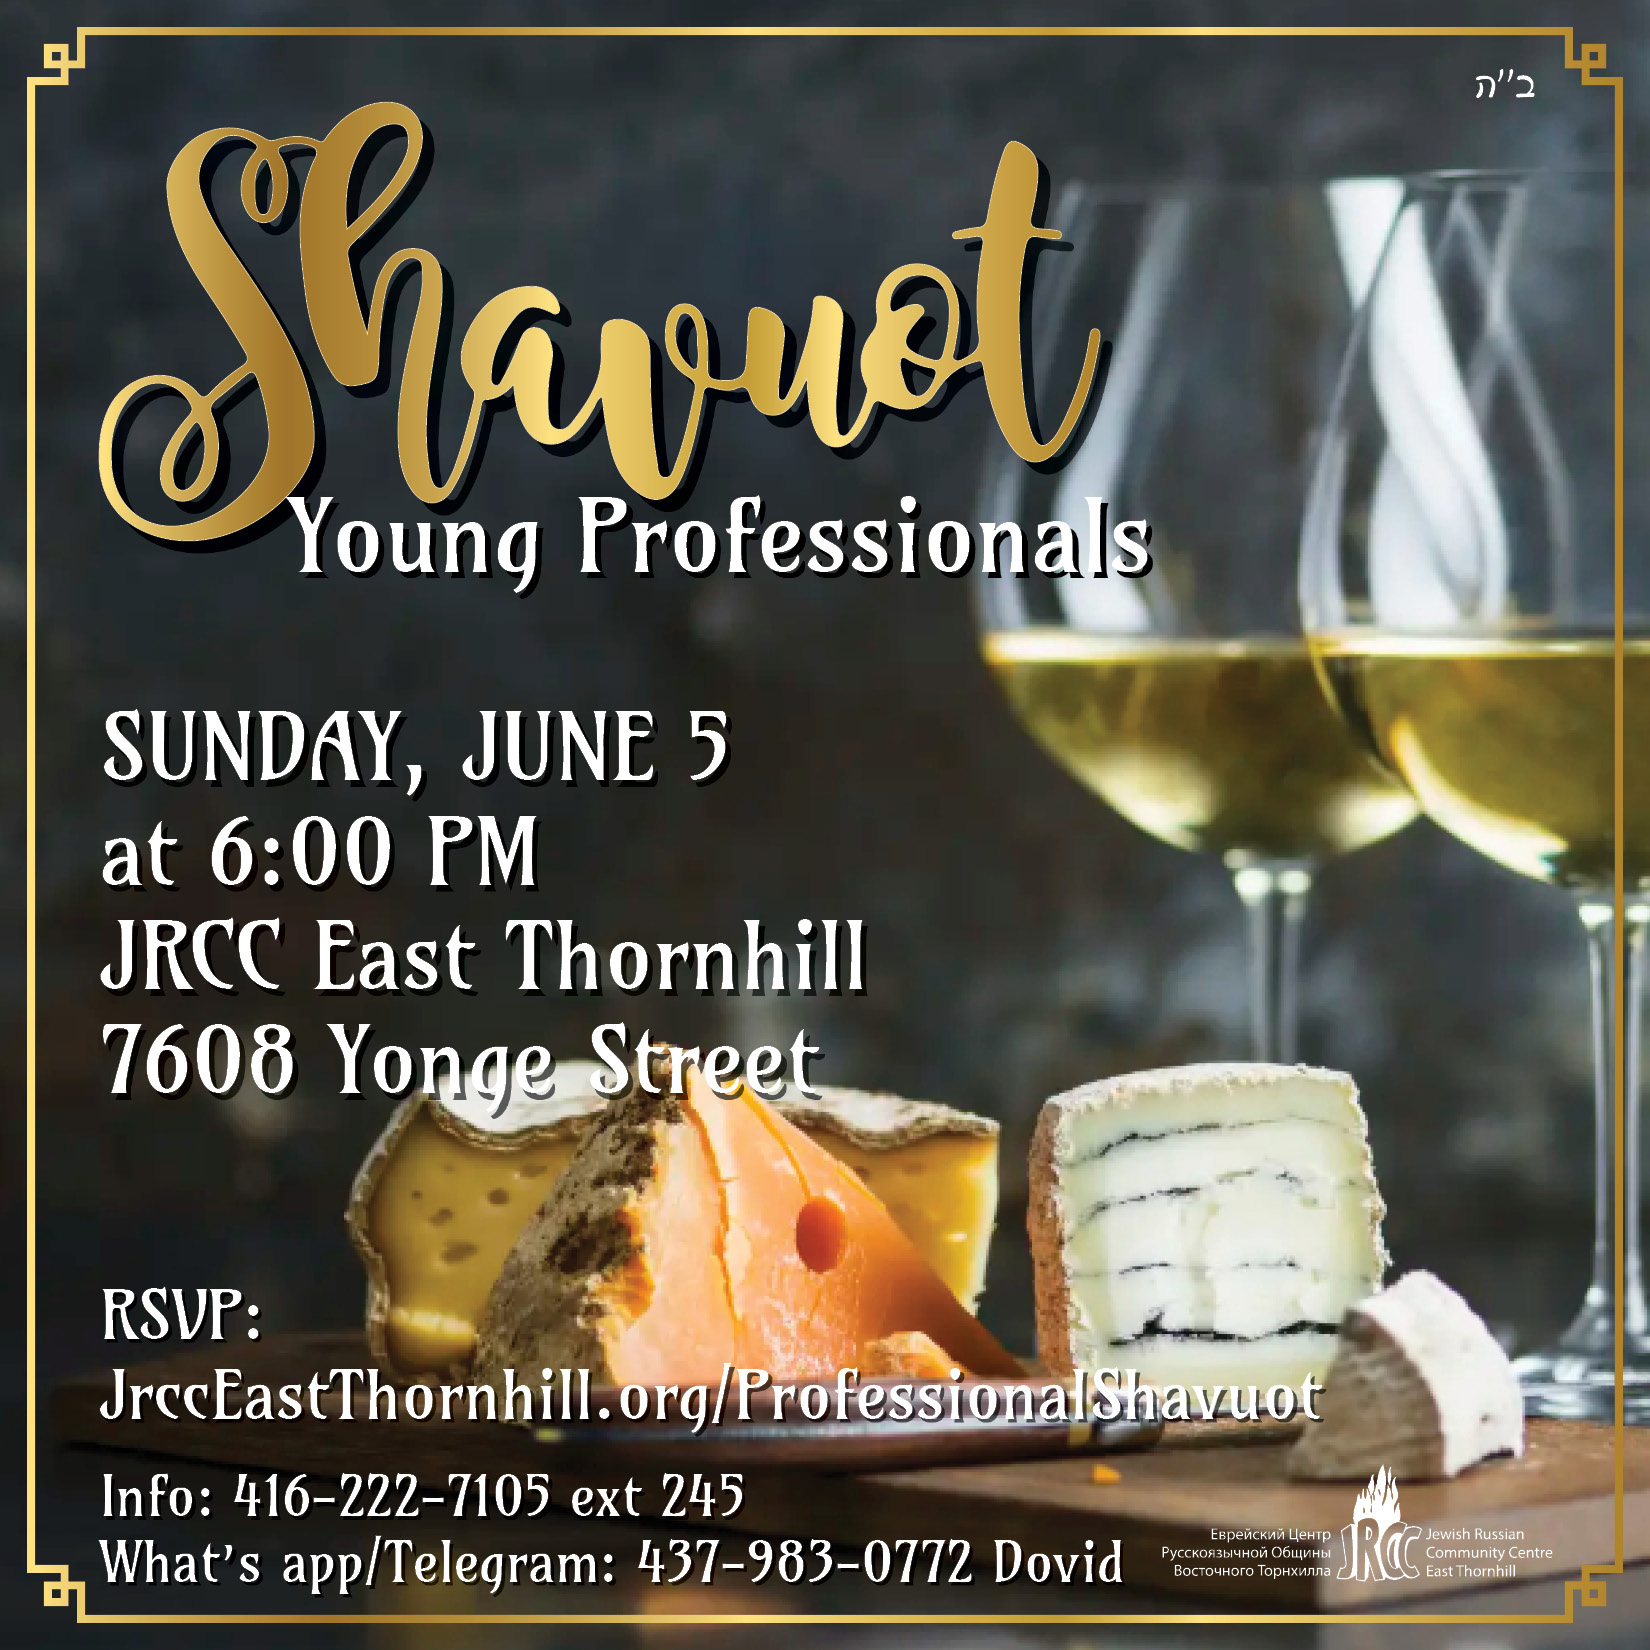 Shavuot Young Professionals.jpg